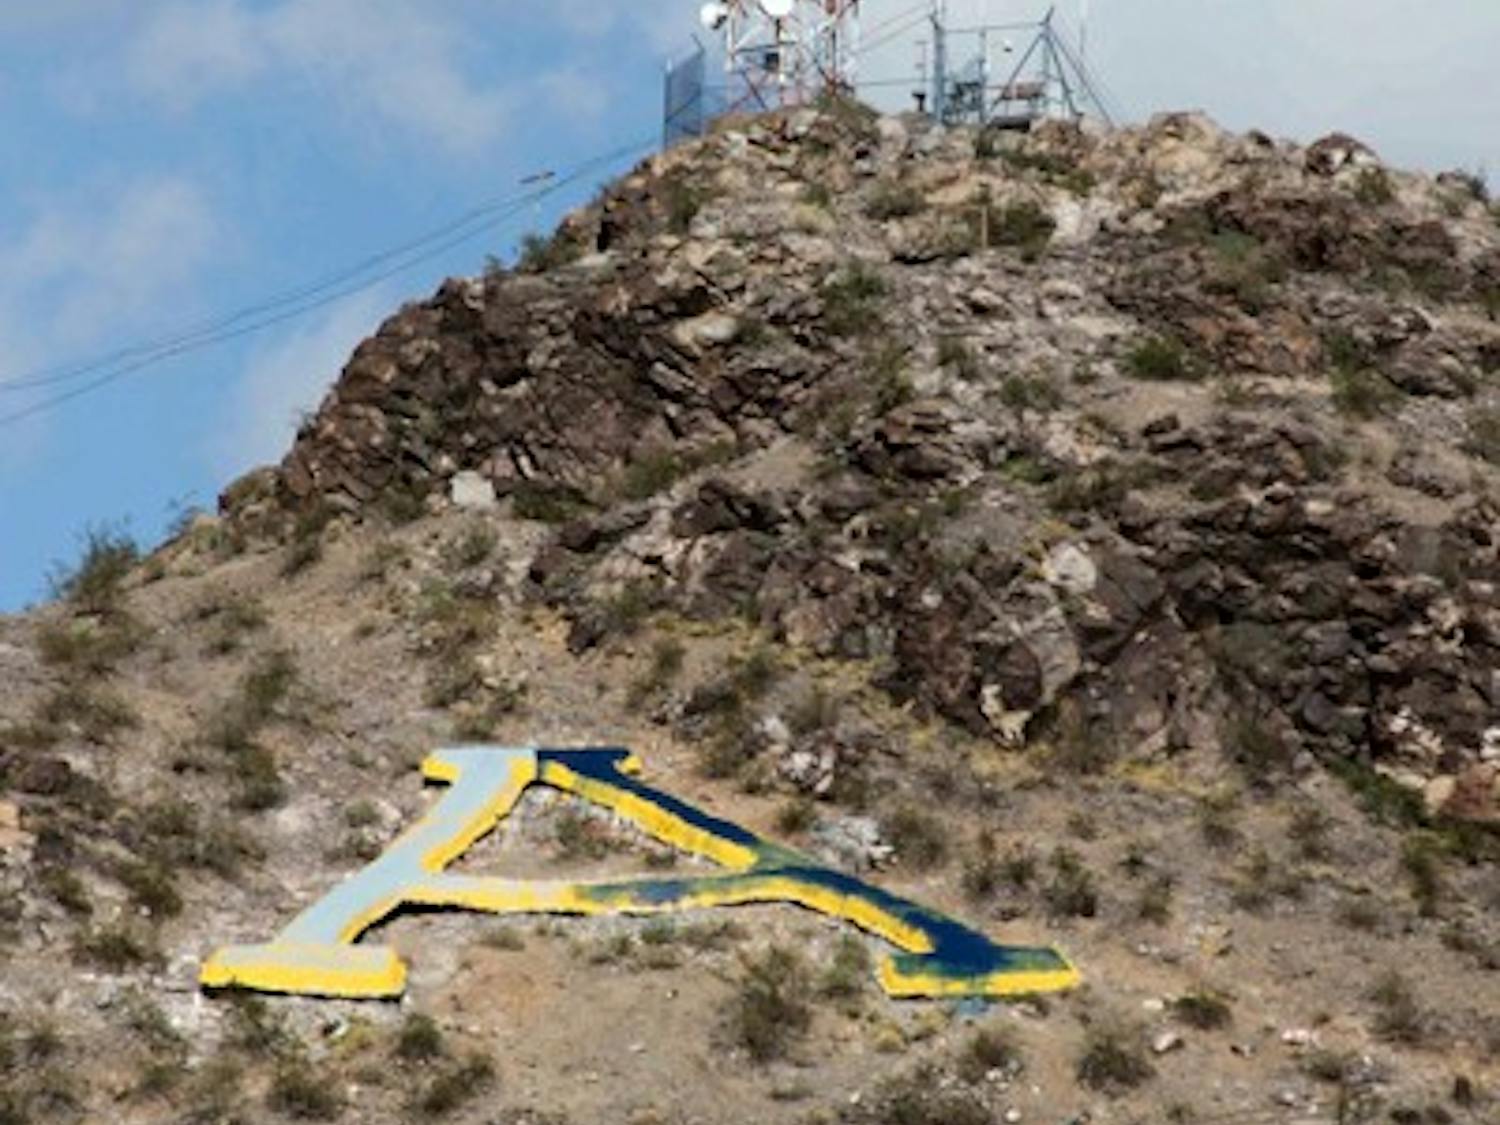 The "A" on Hayden Butte was painted white and blue following ASU's loss to the University of Arizona Saturday night. The ten ASU students and alumni who repainted the "A" gold Monday afternoon said they suspected it was painted by U of A students Sunday night during the rainstorm. (Photo by Lisa Bartoli)